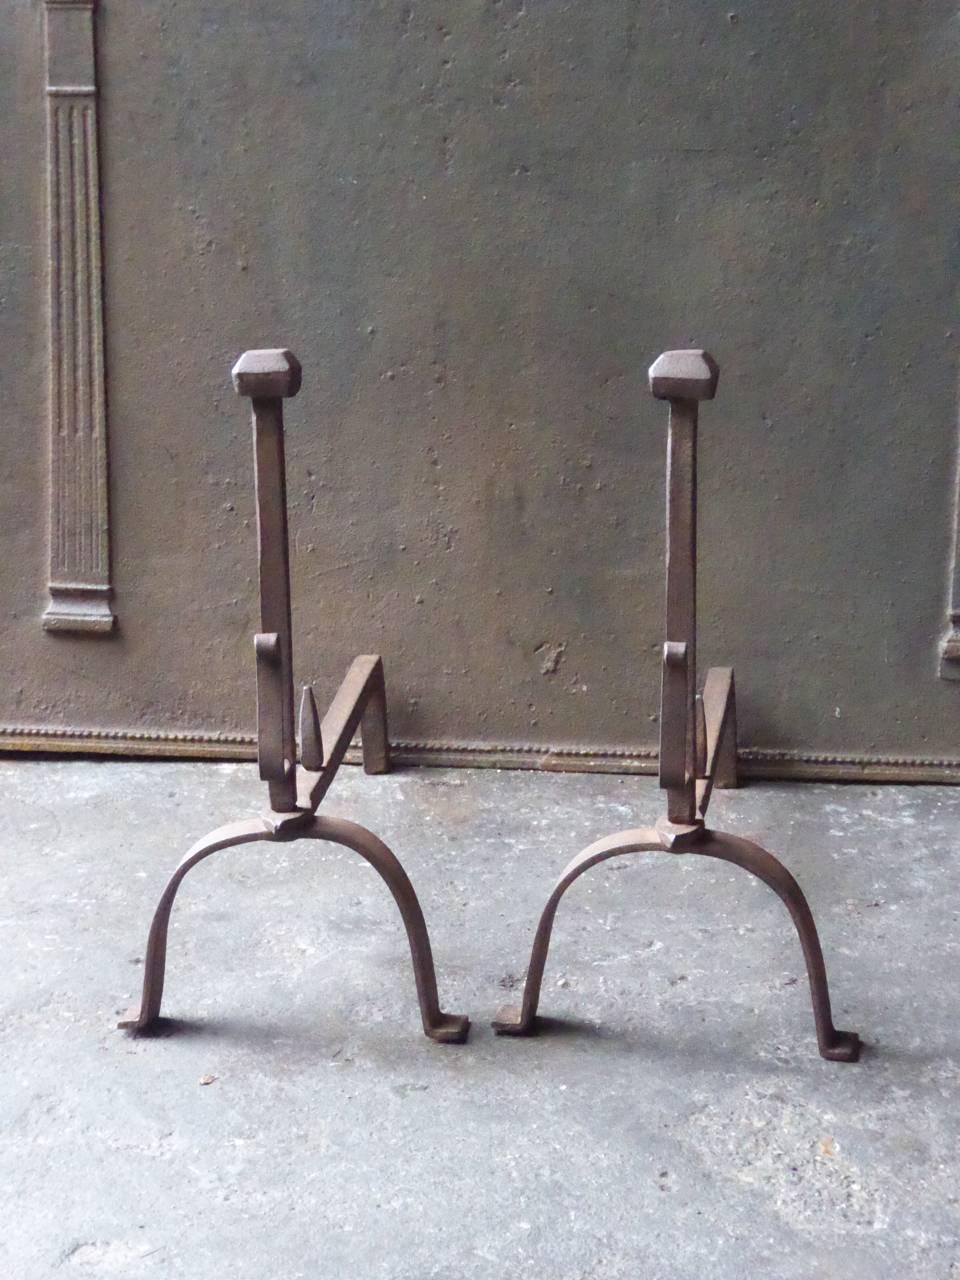 19th century, French Napoleon III period fire dogs made of wrought iron. The andirons have spit hooks to grill food. The condition is good.

